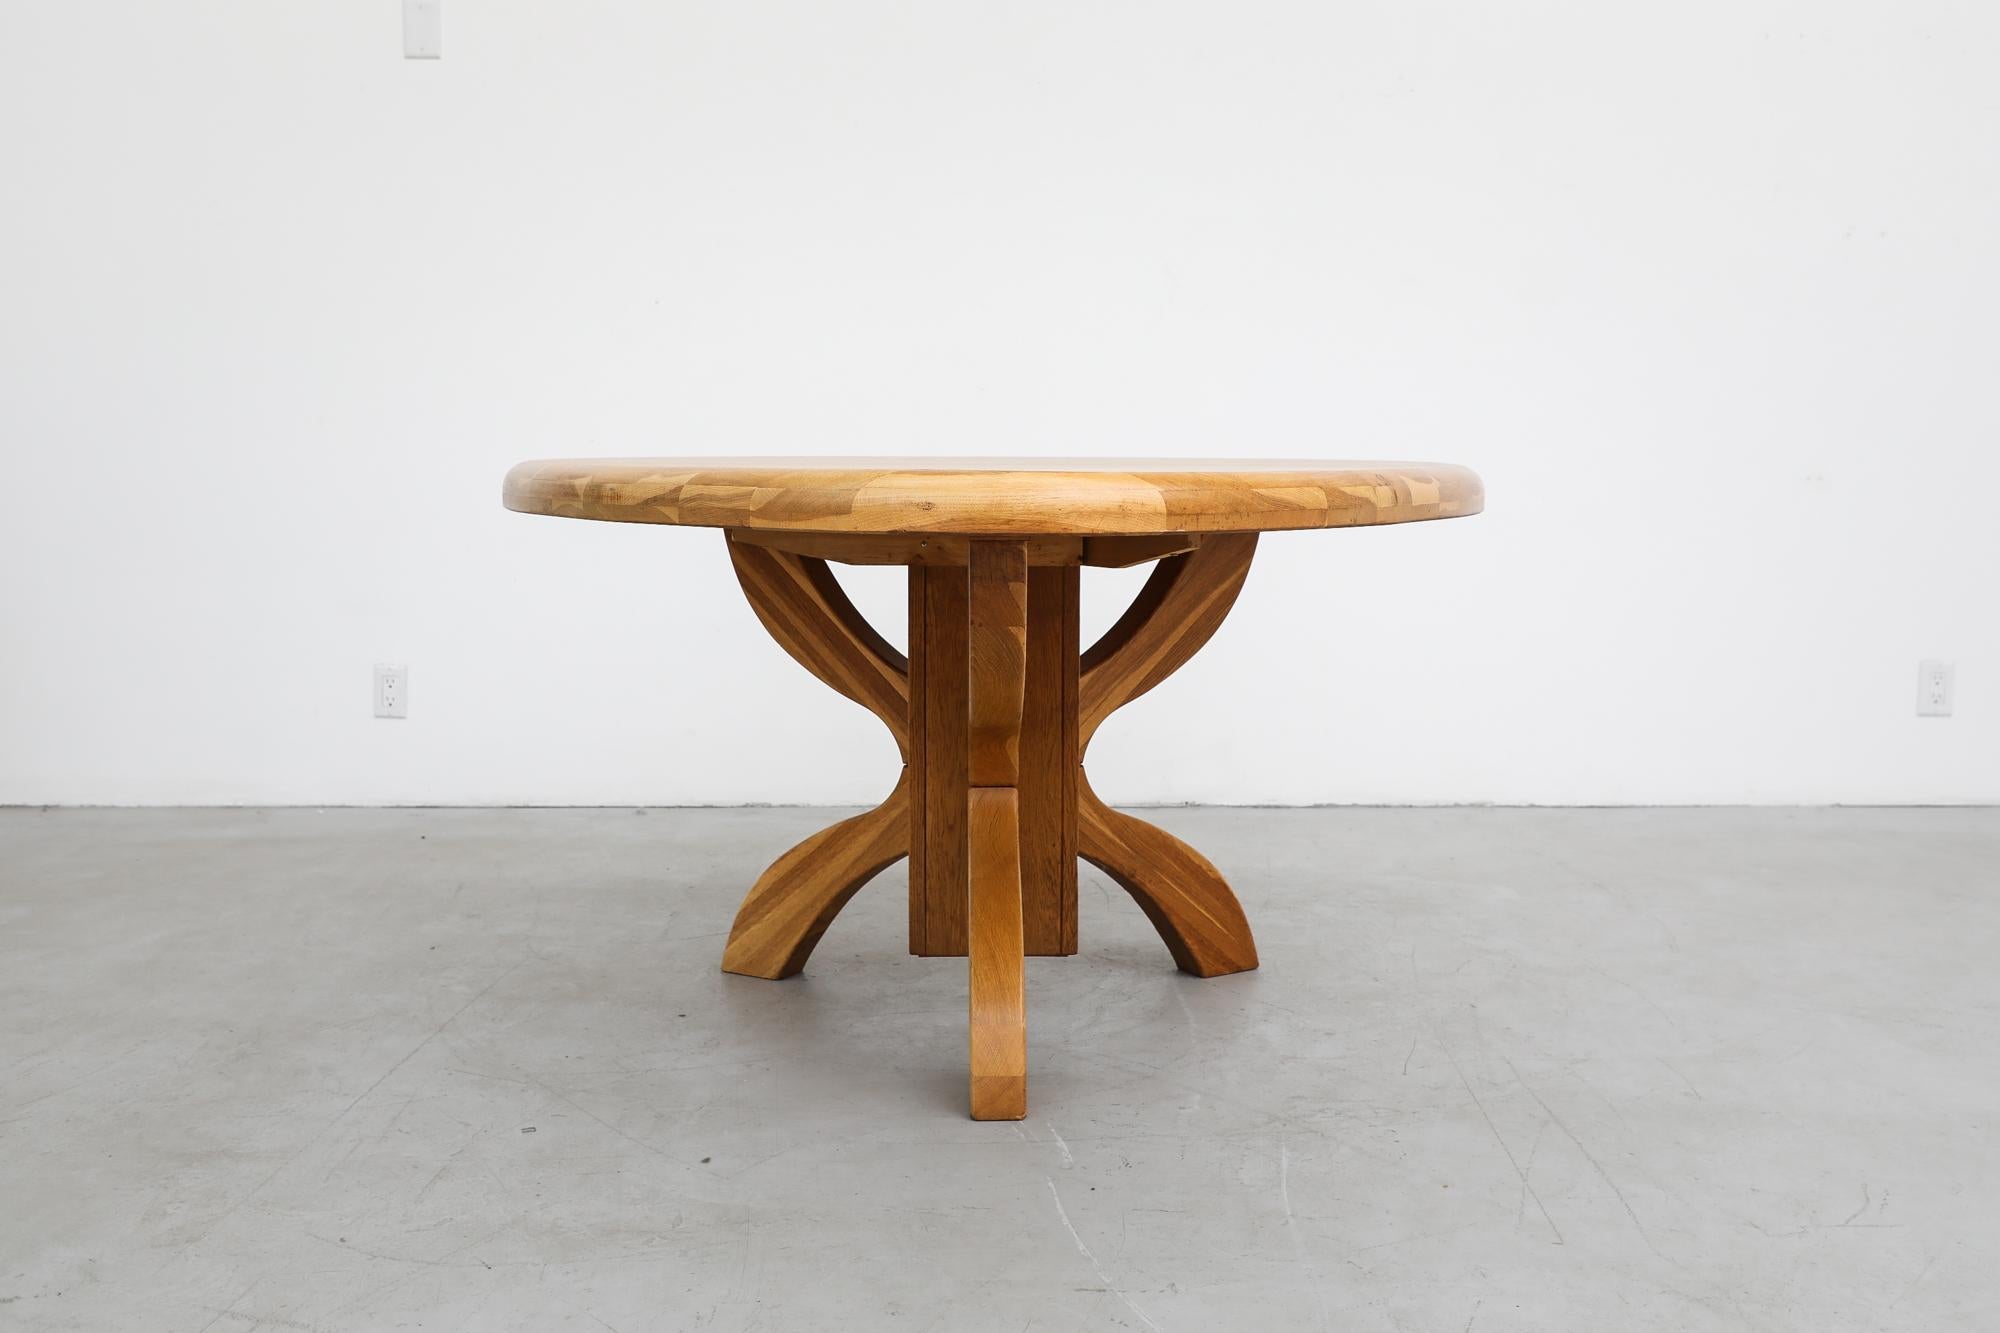 1970s solid golden oak triangular dining or center table with unique tripod pedestal base. In original condition with visible wear consistent with its age and use.